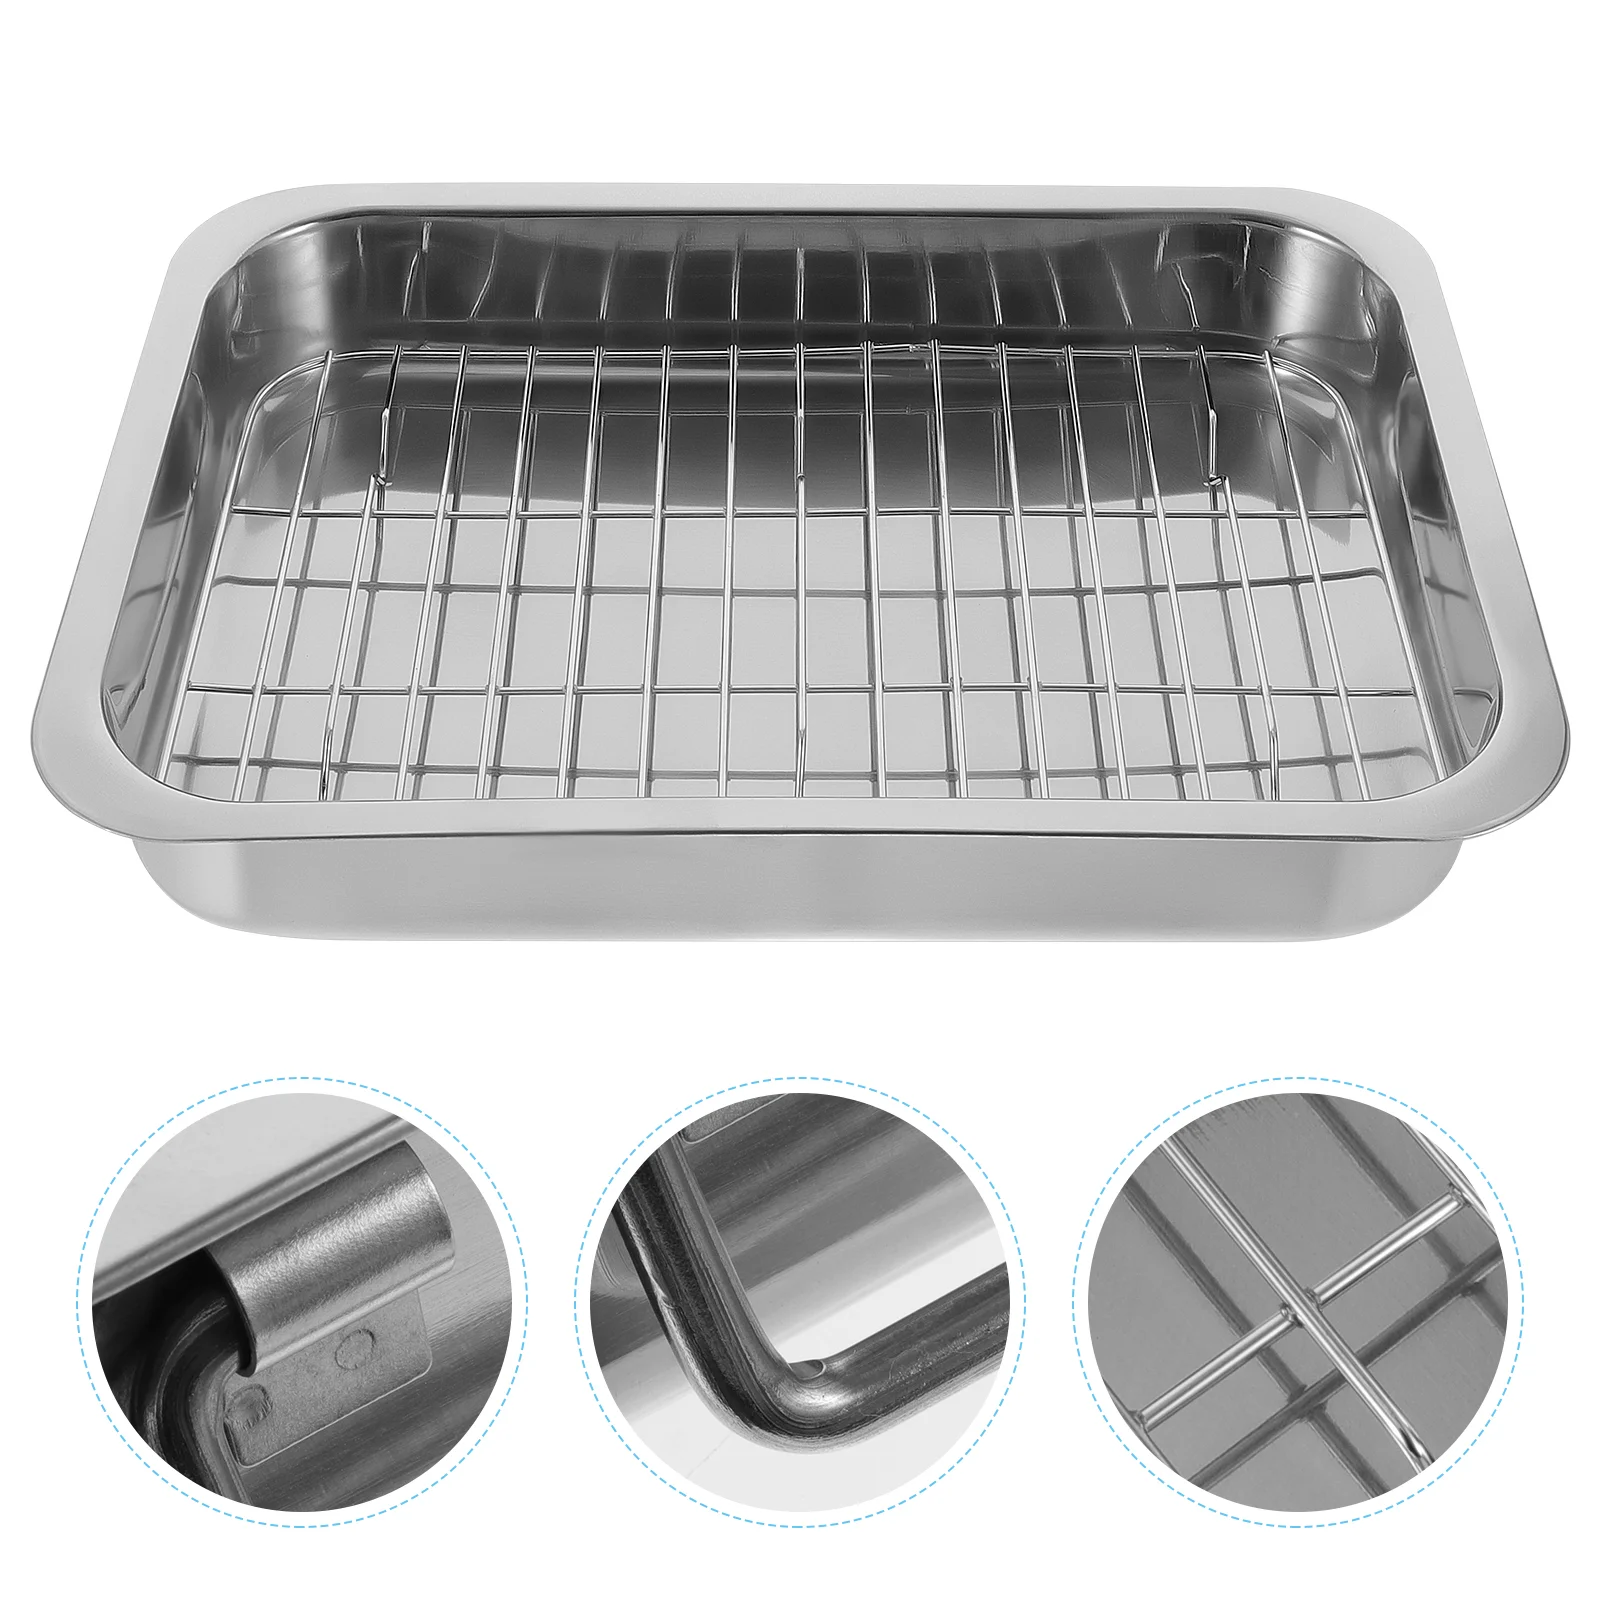 

Baking Pan Rack Tray Sheet Roasting Steel Oven Cookie Stainless Cooling Set Toaster Pans Sheets Cake Trays Roaster Turkey Pizza